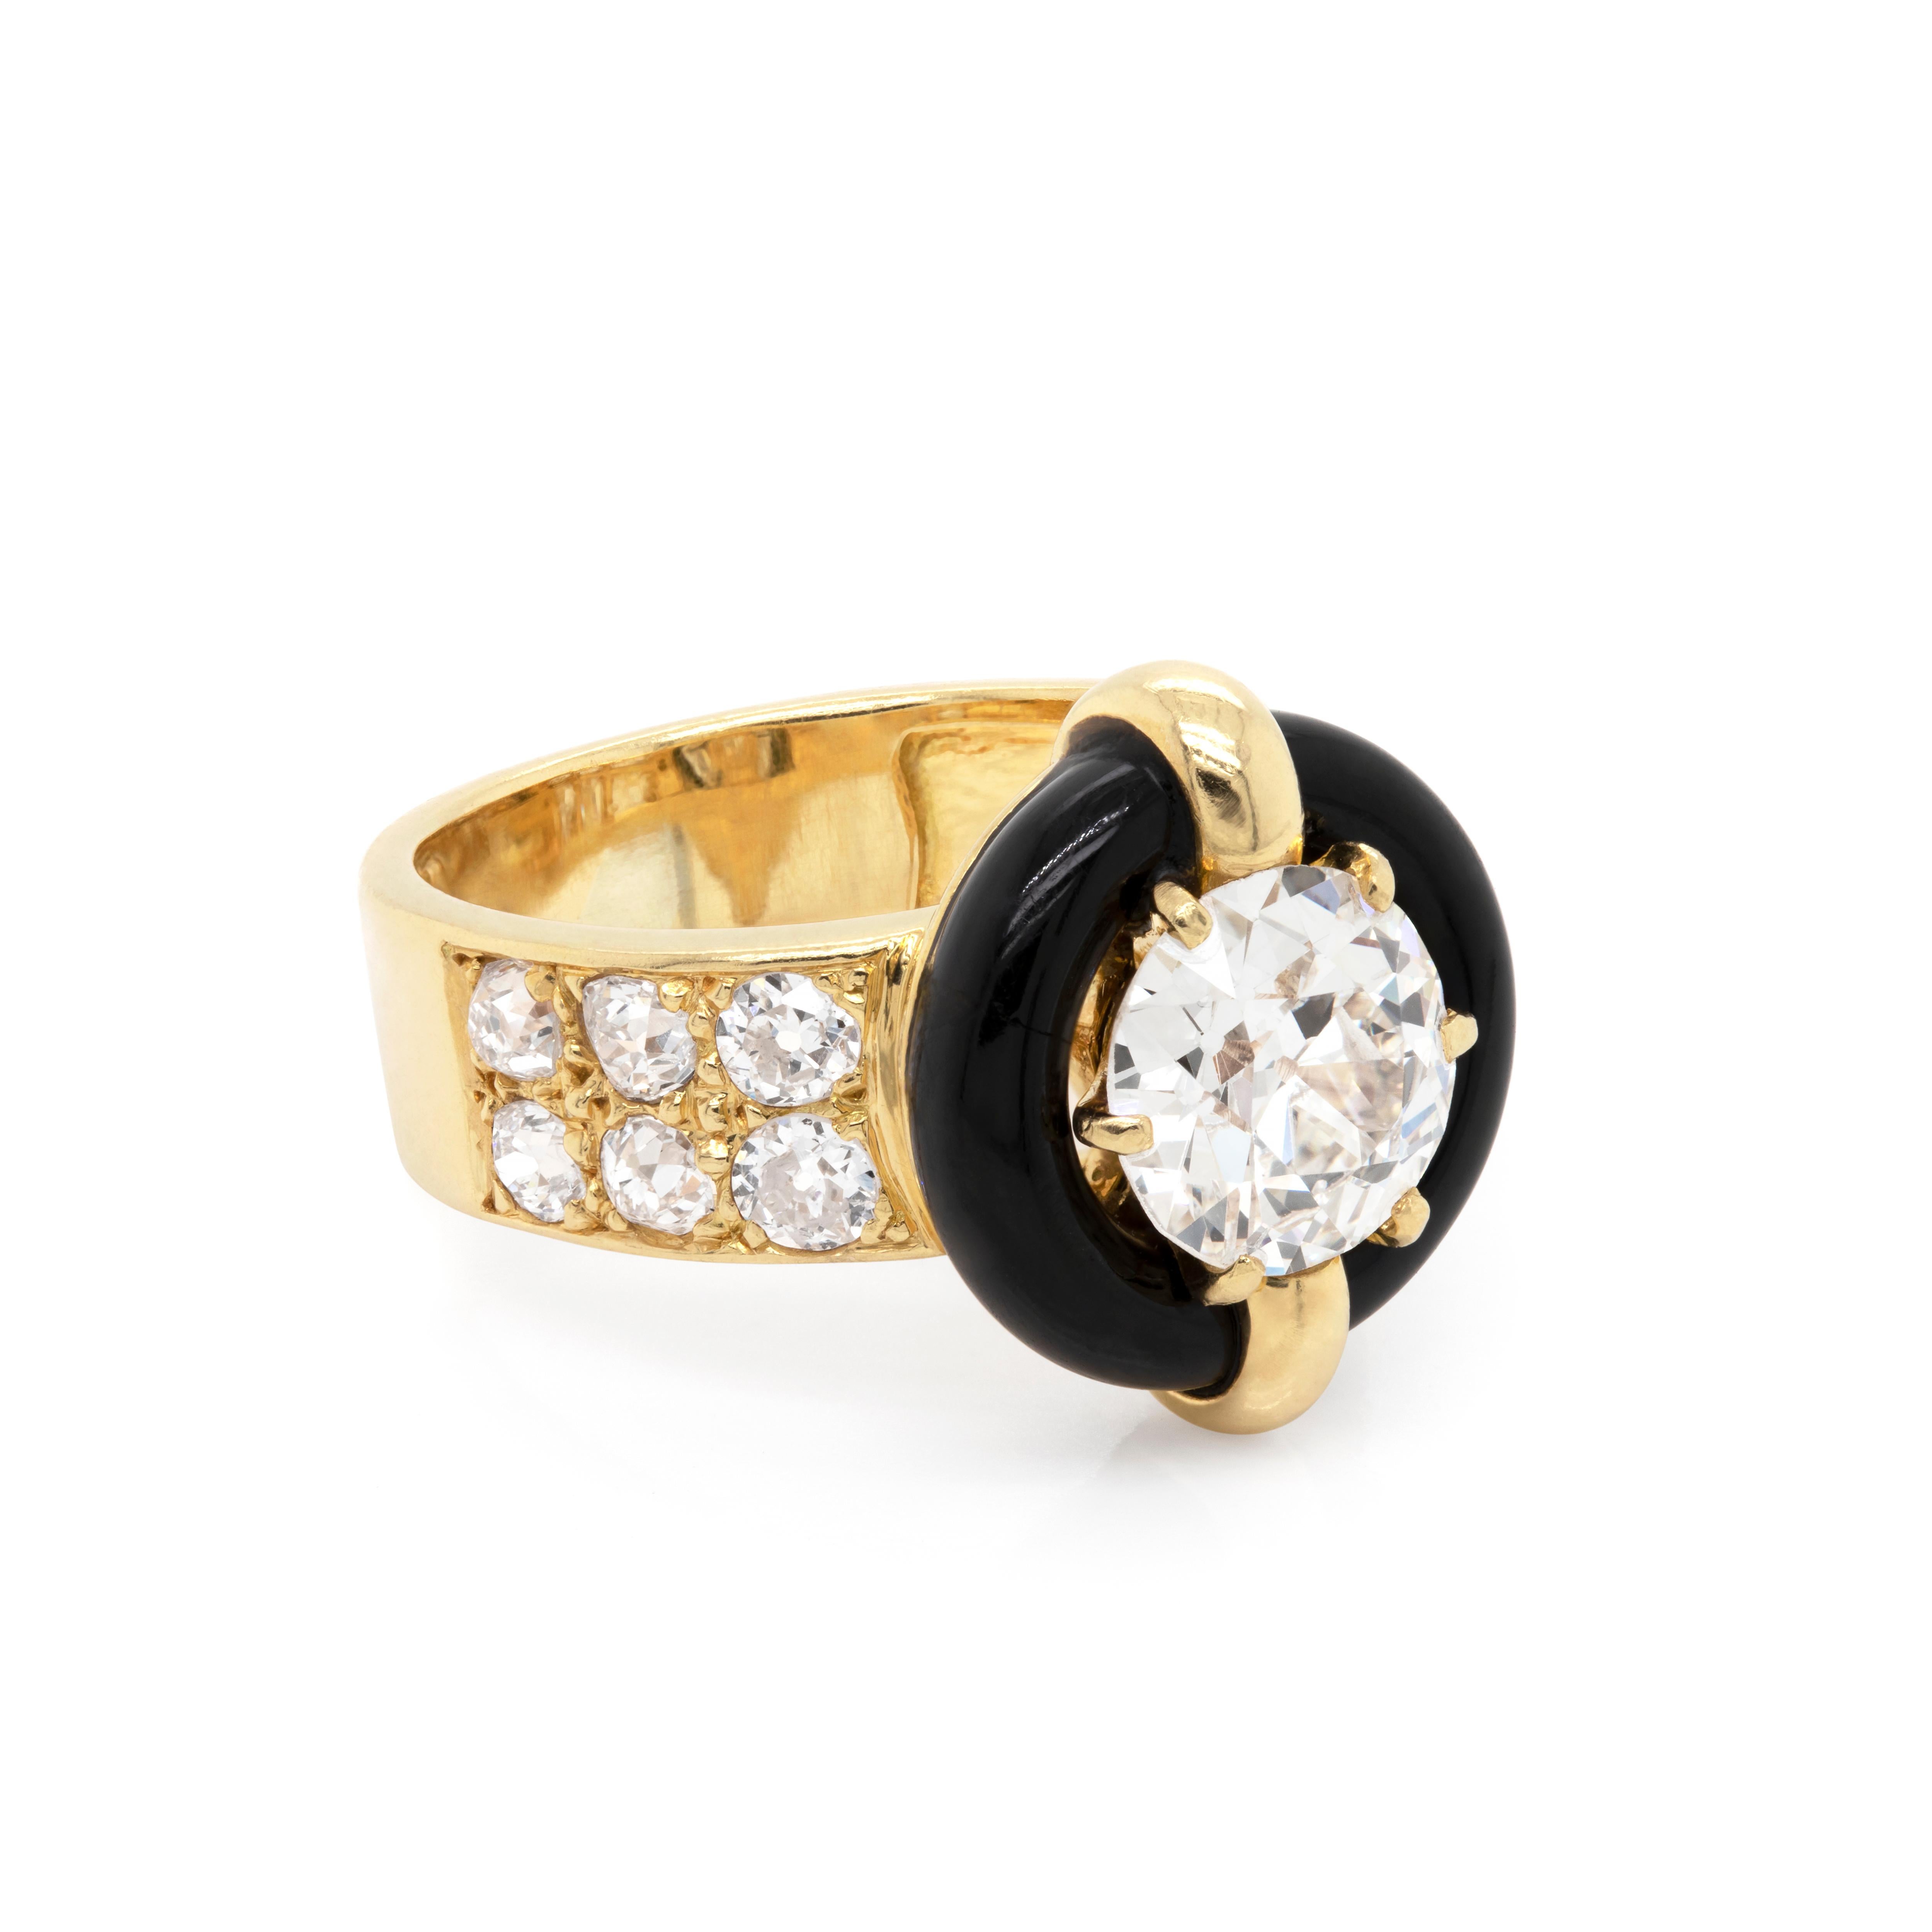 Vintage one of a kind target Mauboussin ring set with a 1.84 carat round old cut diamond in a six claw open back setting, mounted in the centre of a black onyx ring. The band is then grain set with six old cut diamonds on each shoulder with an